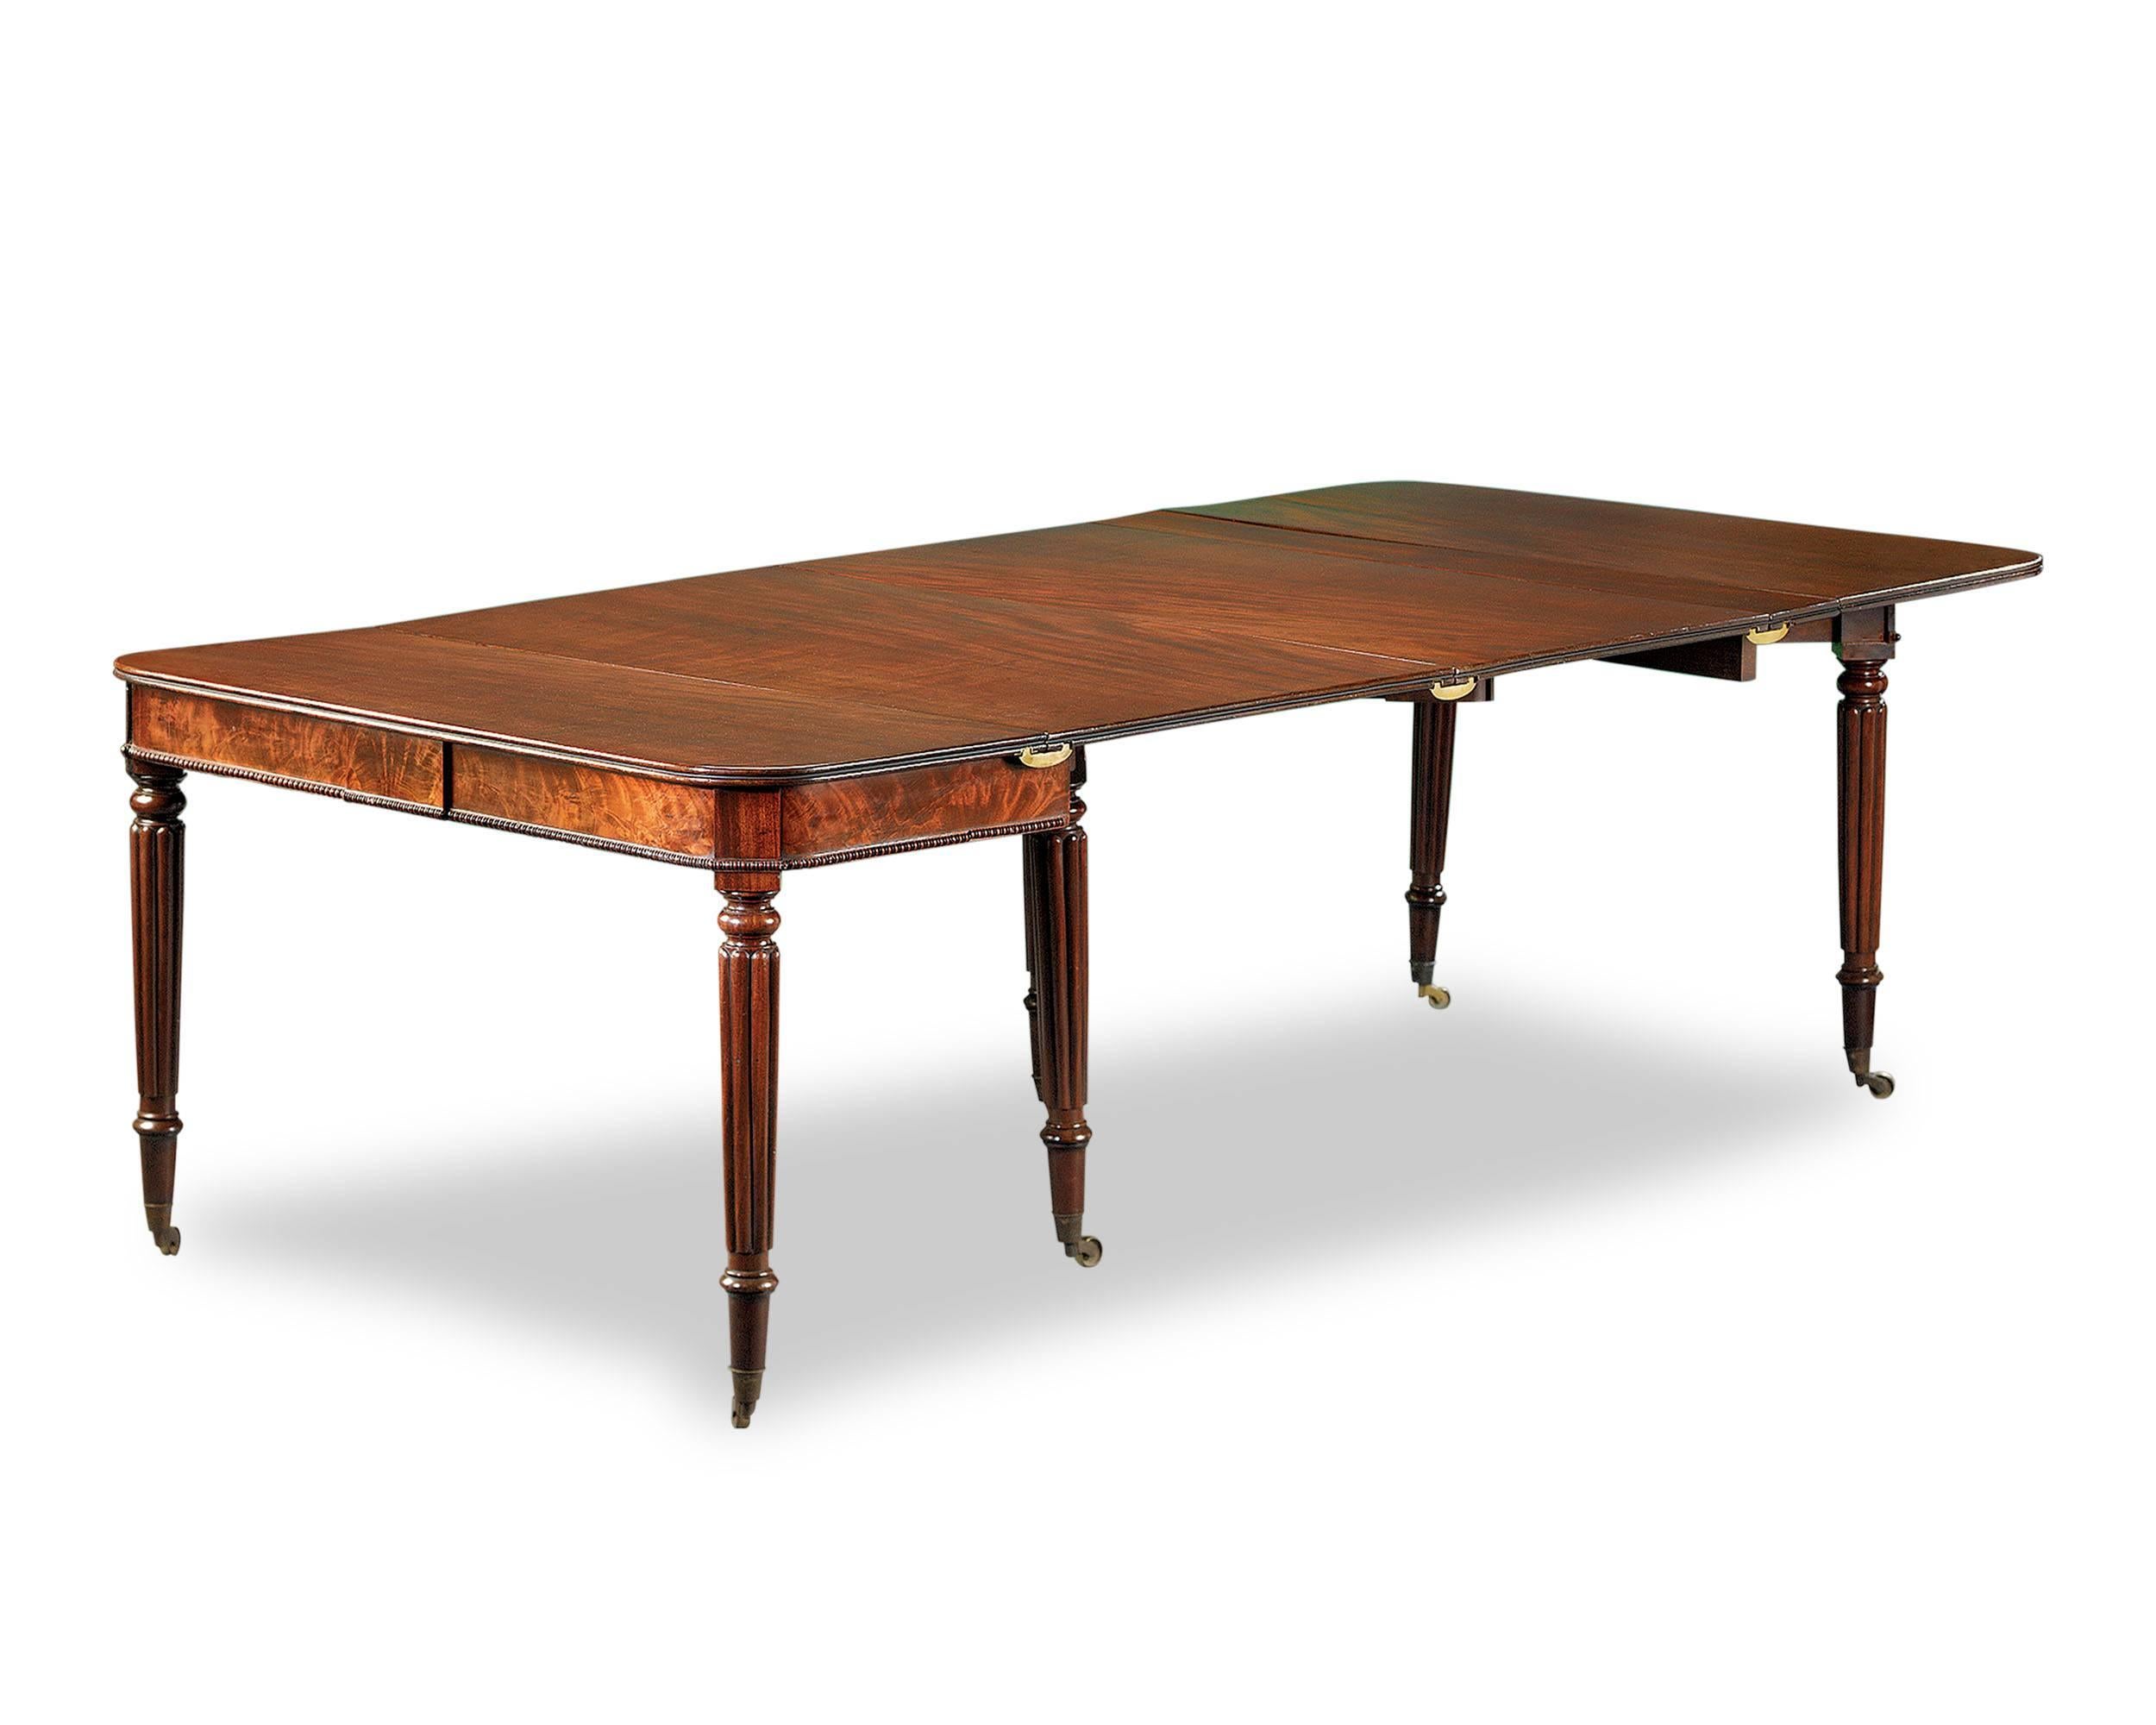 An extraordinary and uniquely designed 18th-century English accordion dining table, beautifully crafted of mahogany. This remarkable piece transforms into a 95